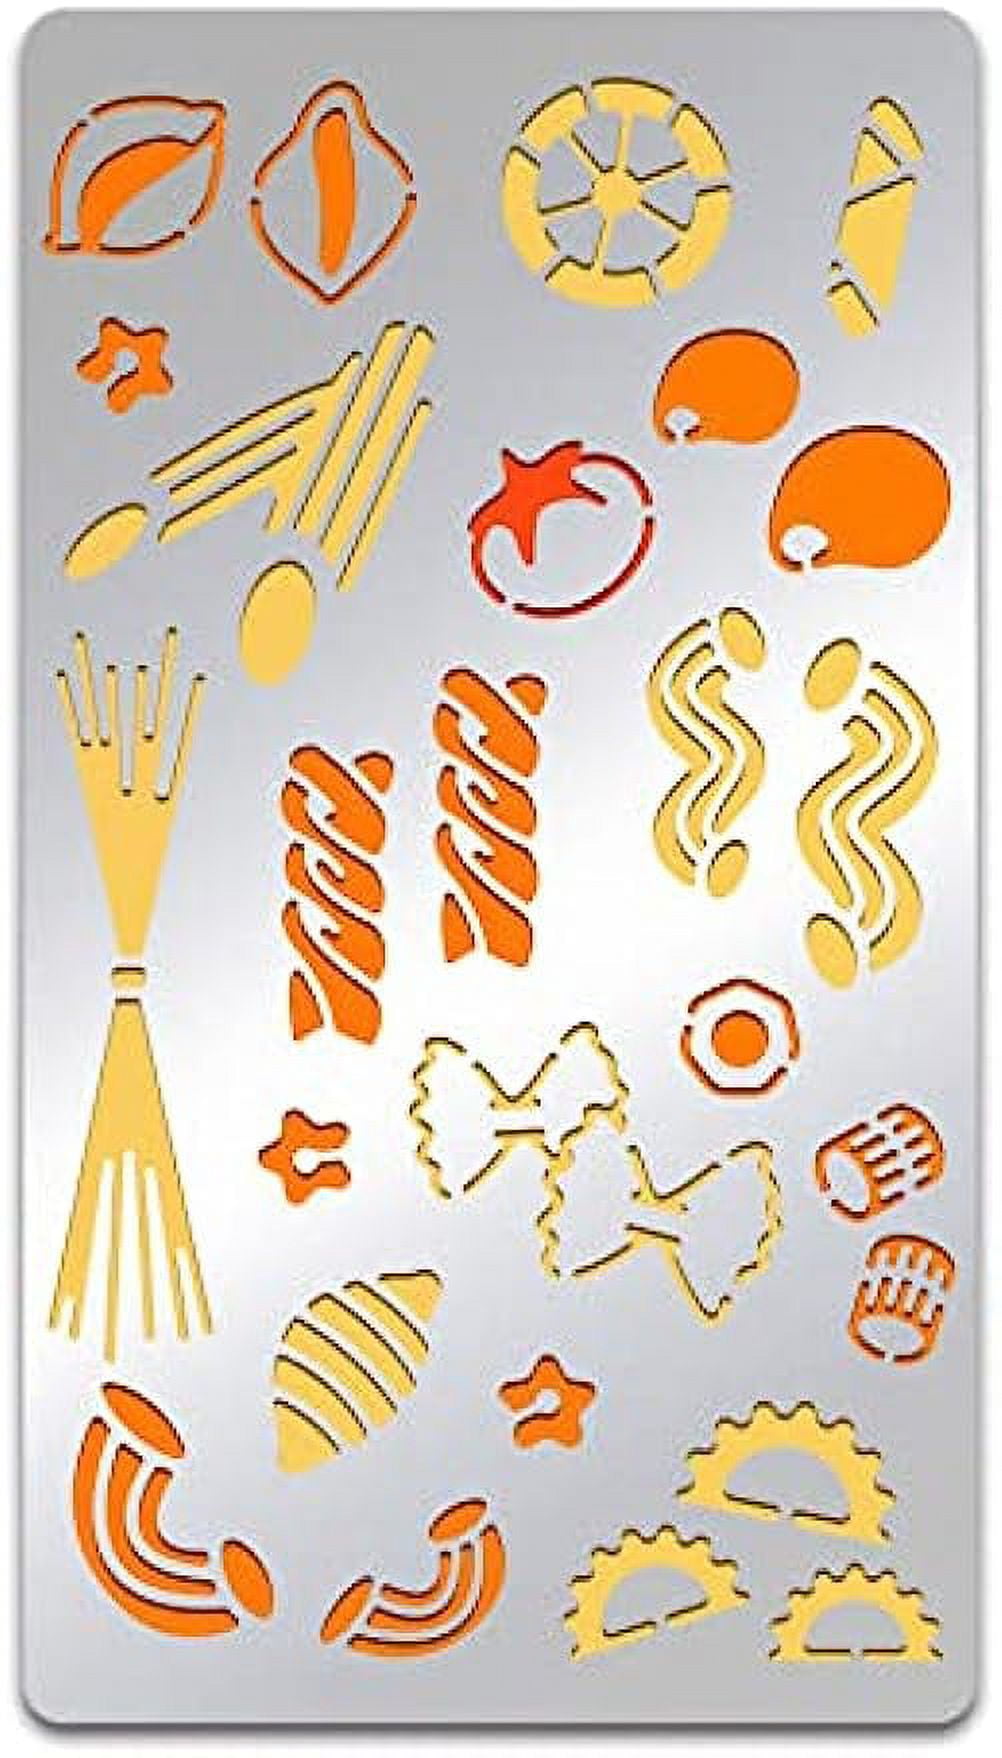 4x7 Inch Leave Wood Burning Metal Stencils Template for Wood carving,  Drawings,Woodburning, Engraving and Scrapbooking Project